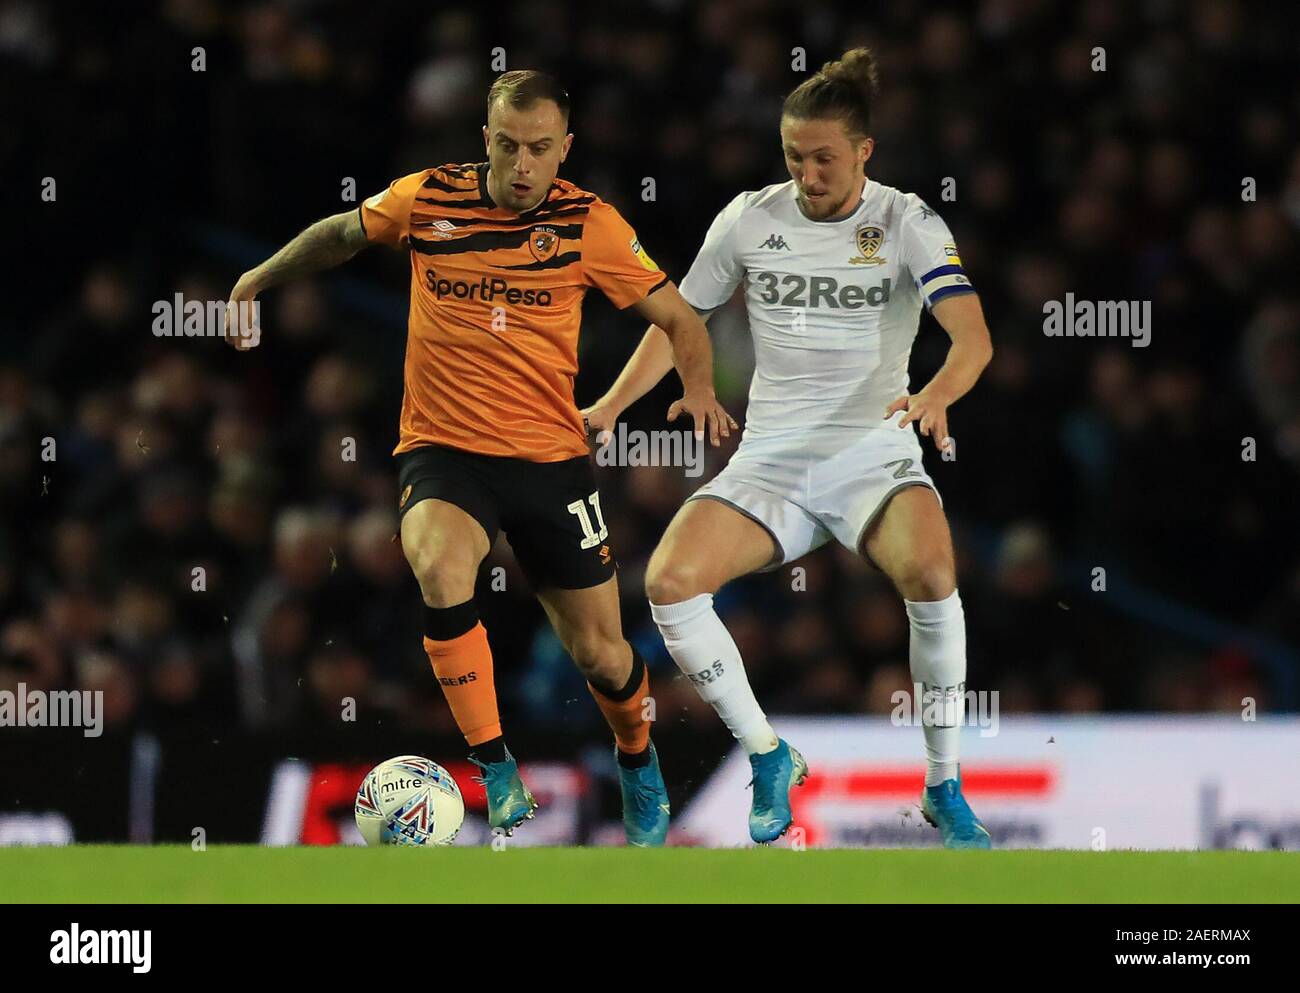 Hull City's Kamil Grosicki and Leeds United's Luke Ayling (right) battle for the ball during the Sky Bet Championship match at Elland Road, Leeds. Stock Photo